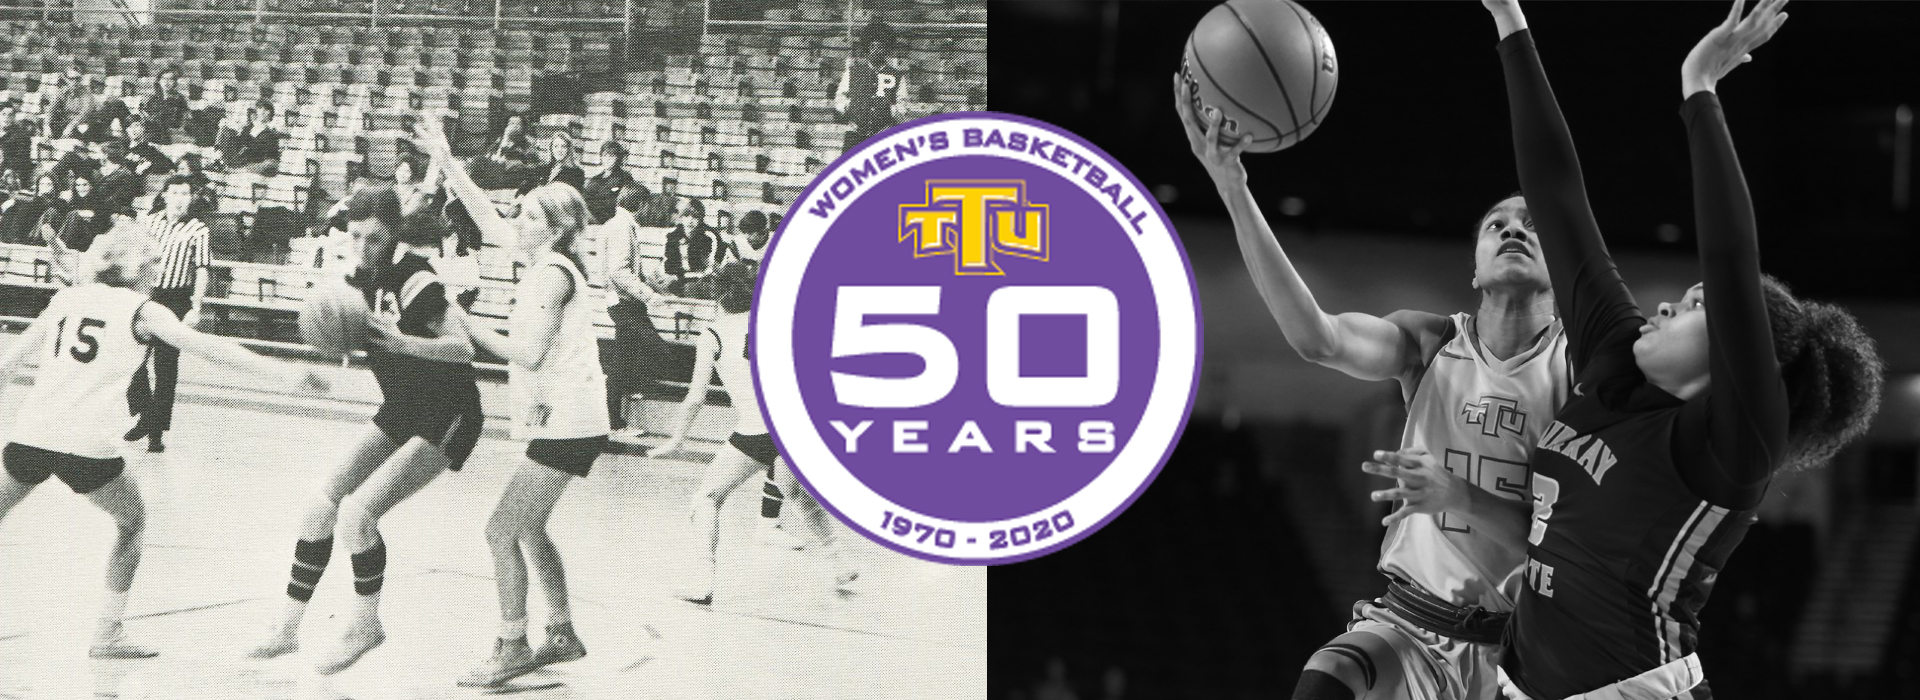 Tech Women's Basketball 50th Anniversary Reunion Weekend to be held Jan. 6-8, Celebration Event at Saltbox Inn